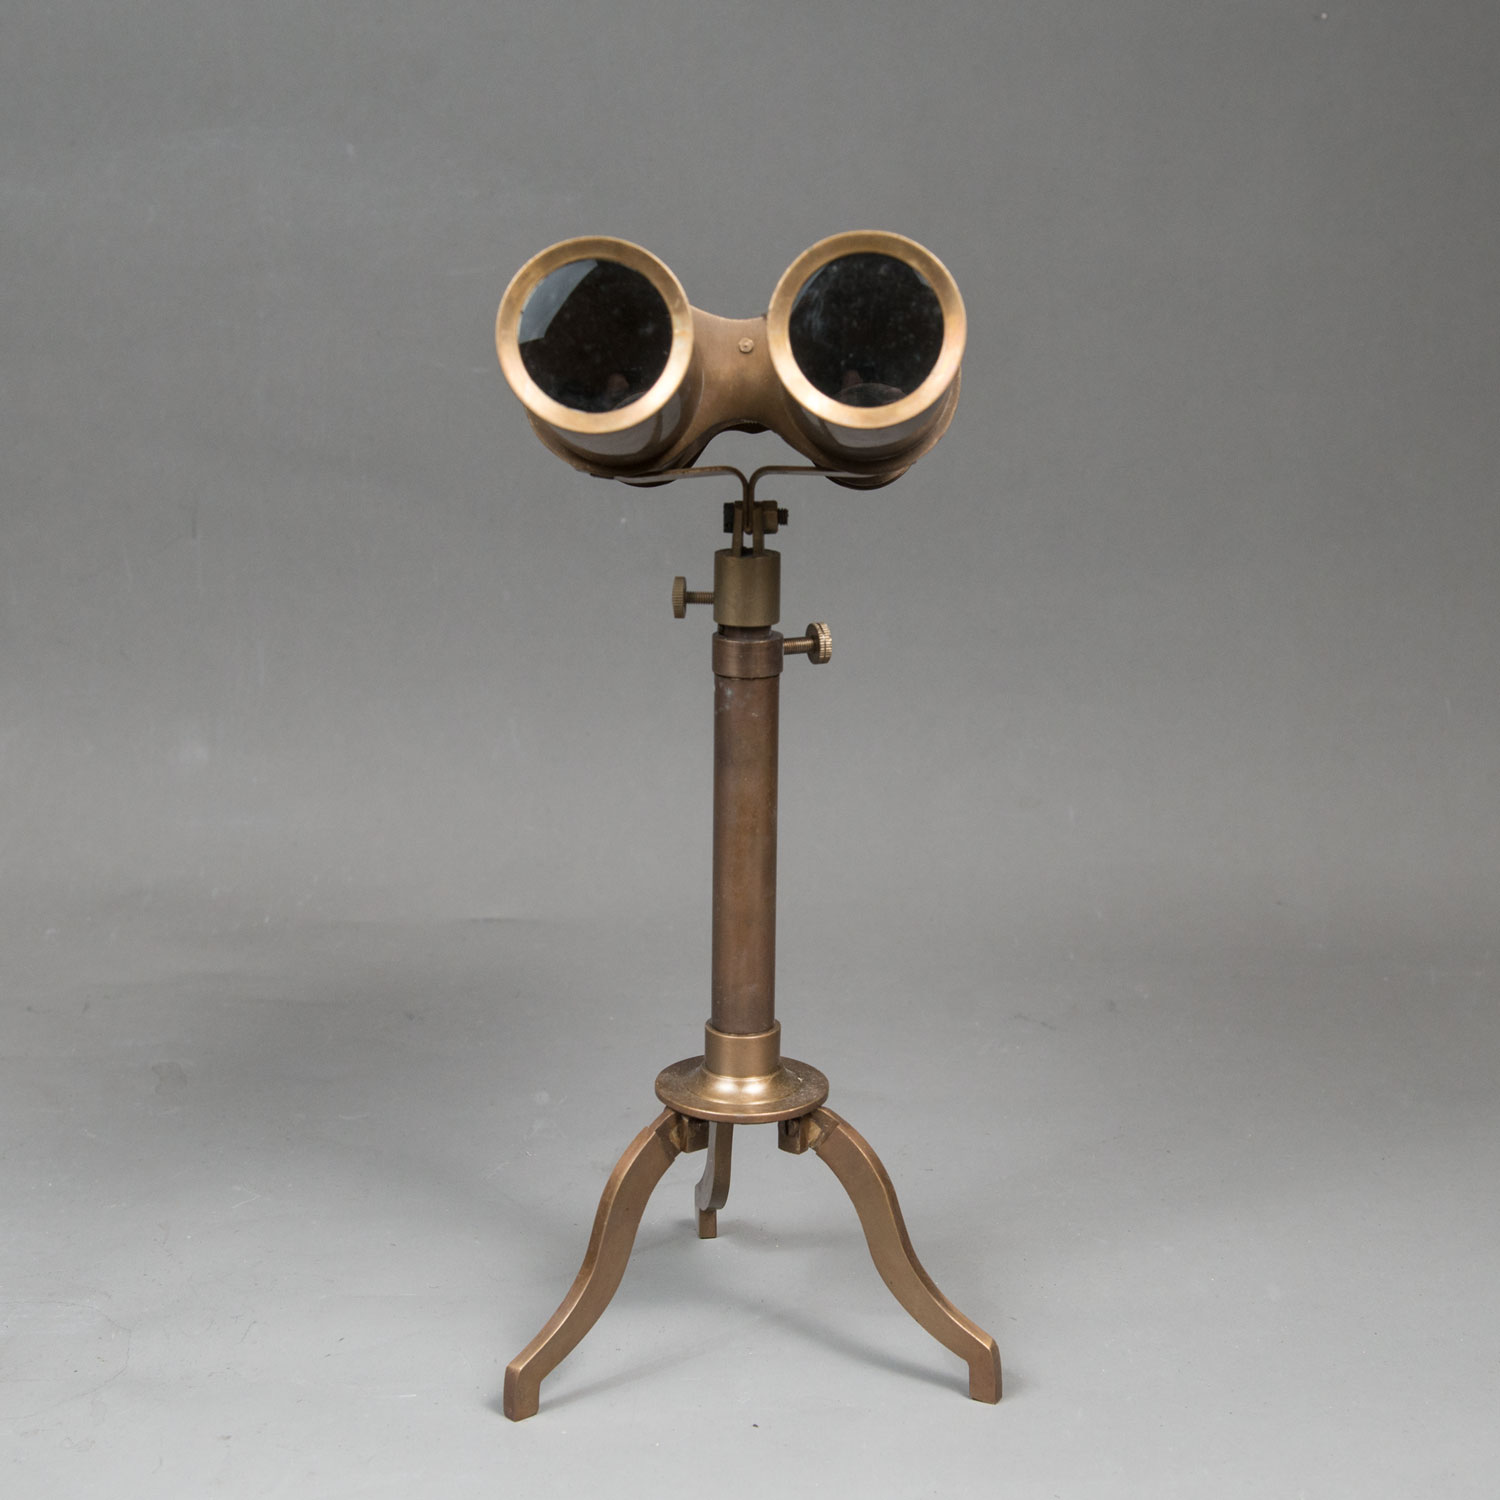 Binocular with Stand - Image 2 of 3